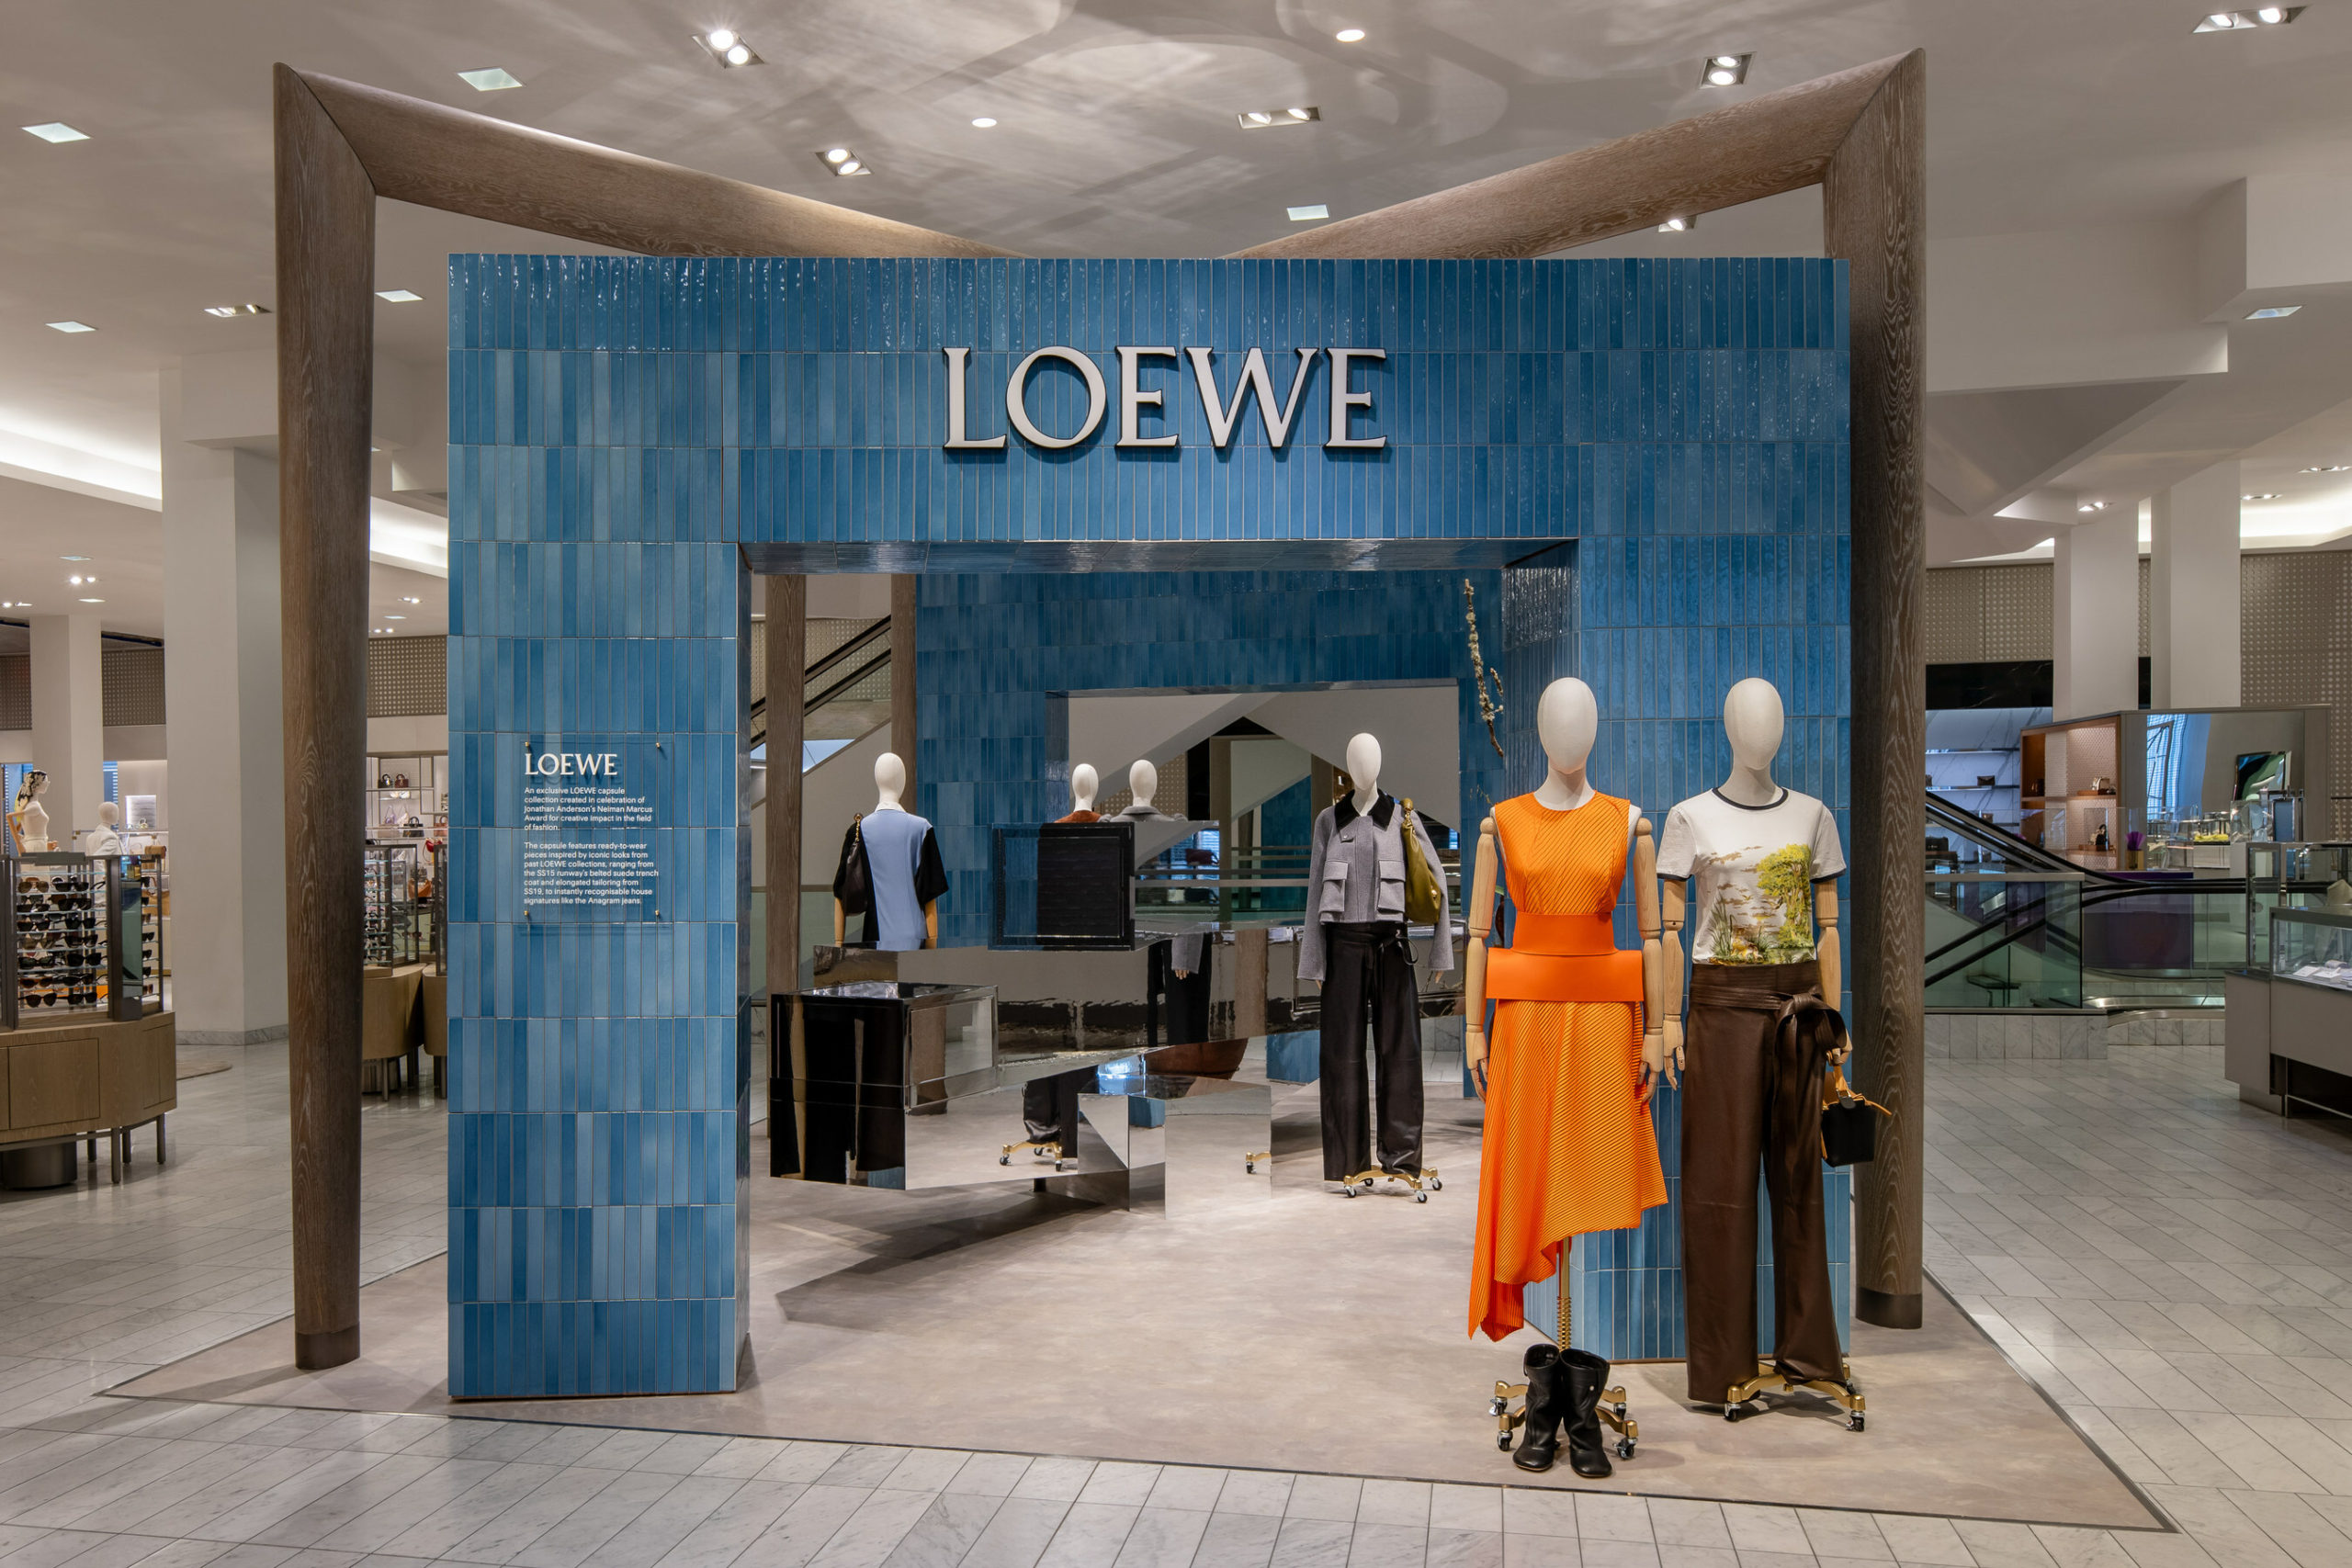 Neiman Marcus Launches LOEWE Collection